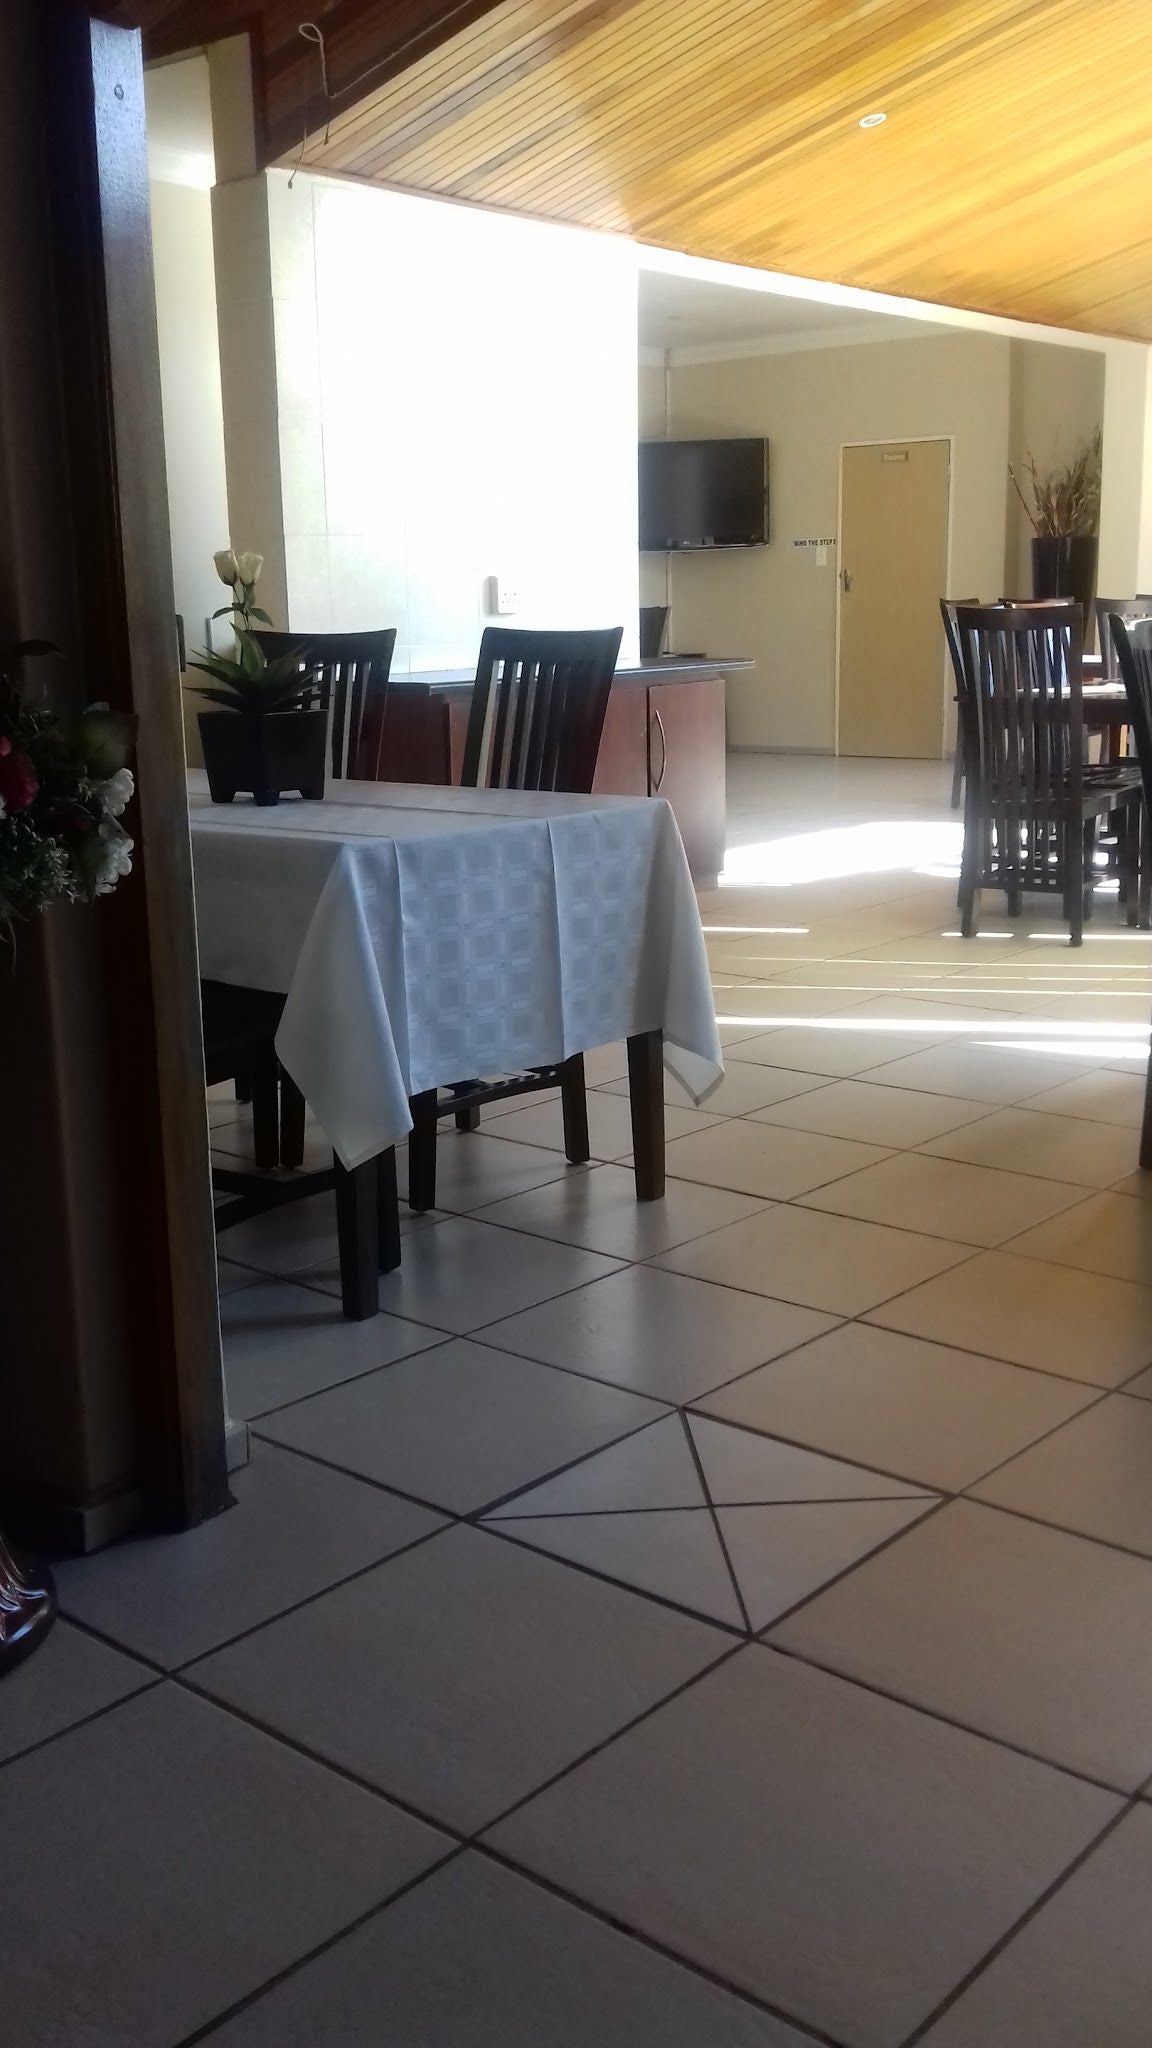 Bongiwe Accommodation Polokwane Pietersburg Limpopo Province South Africa Place Cover, Food